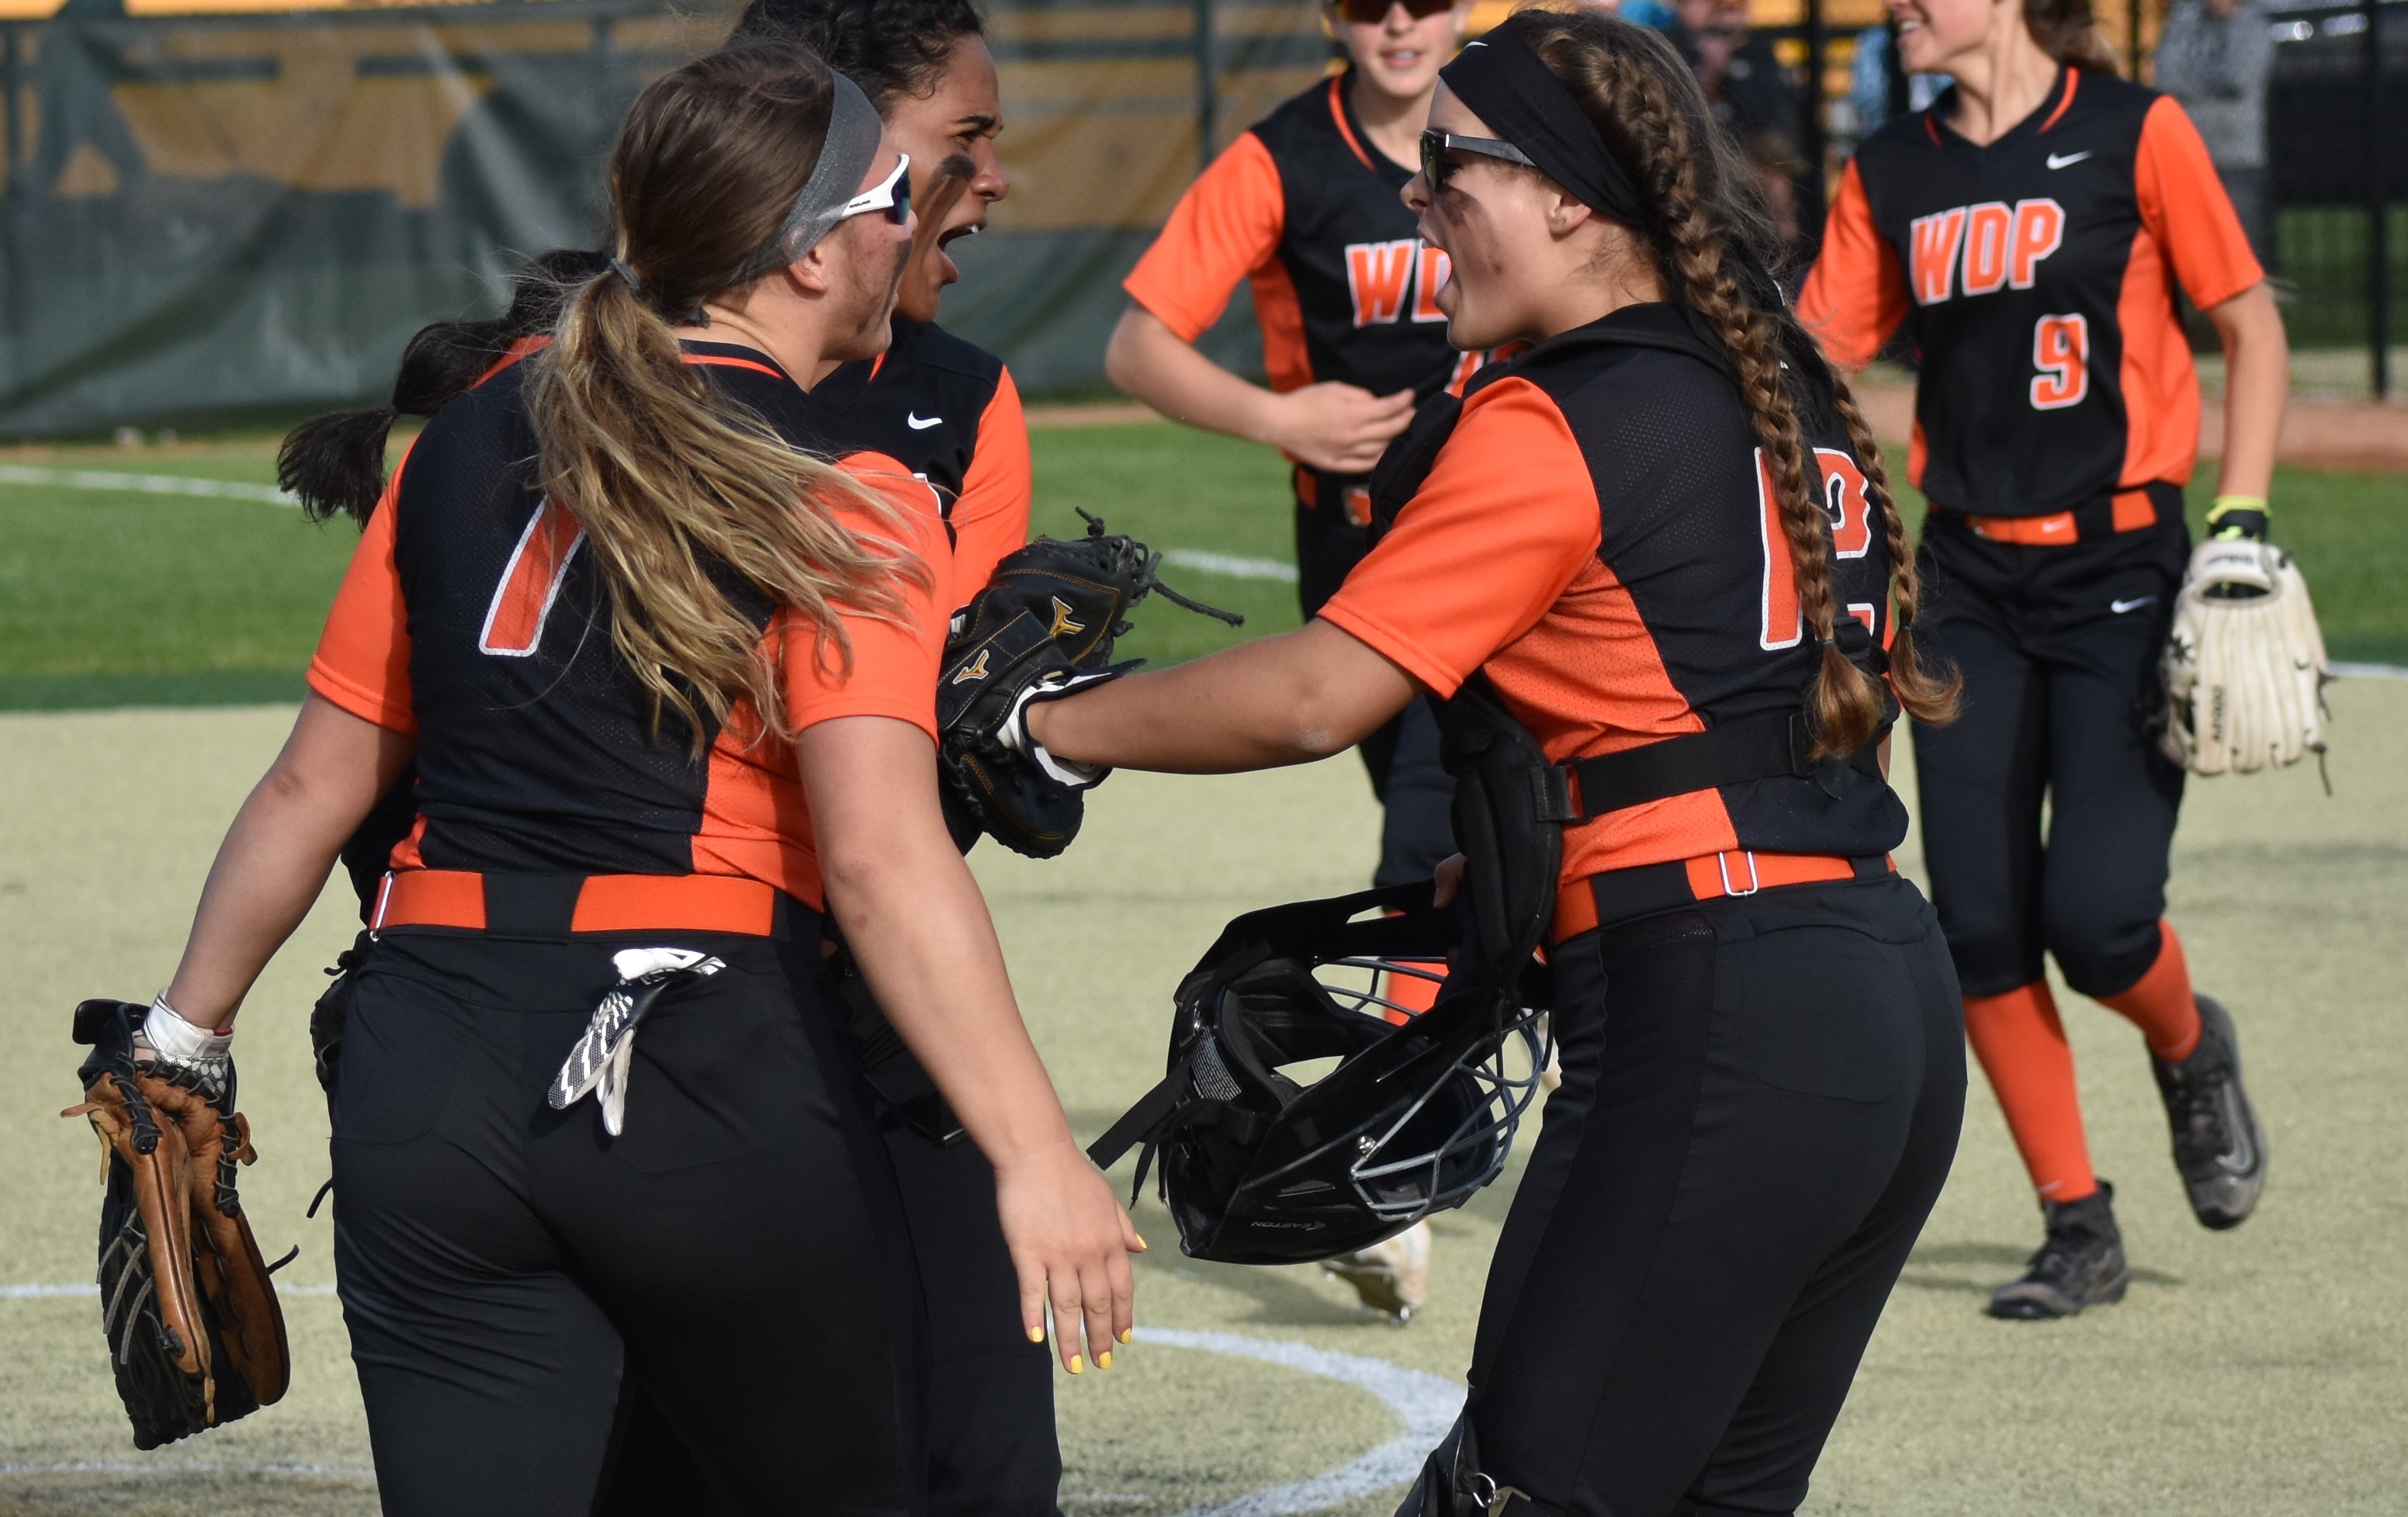 Phantoms softball advances to sectional final; one step away from state